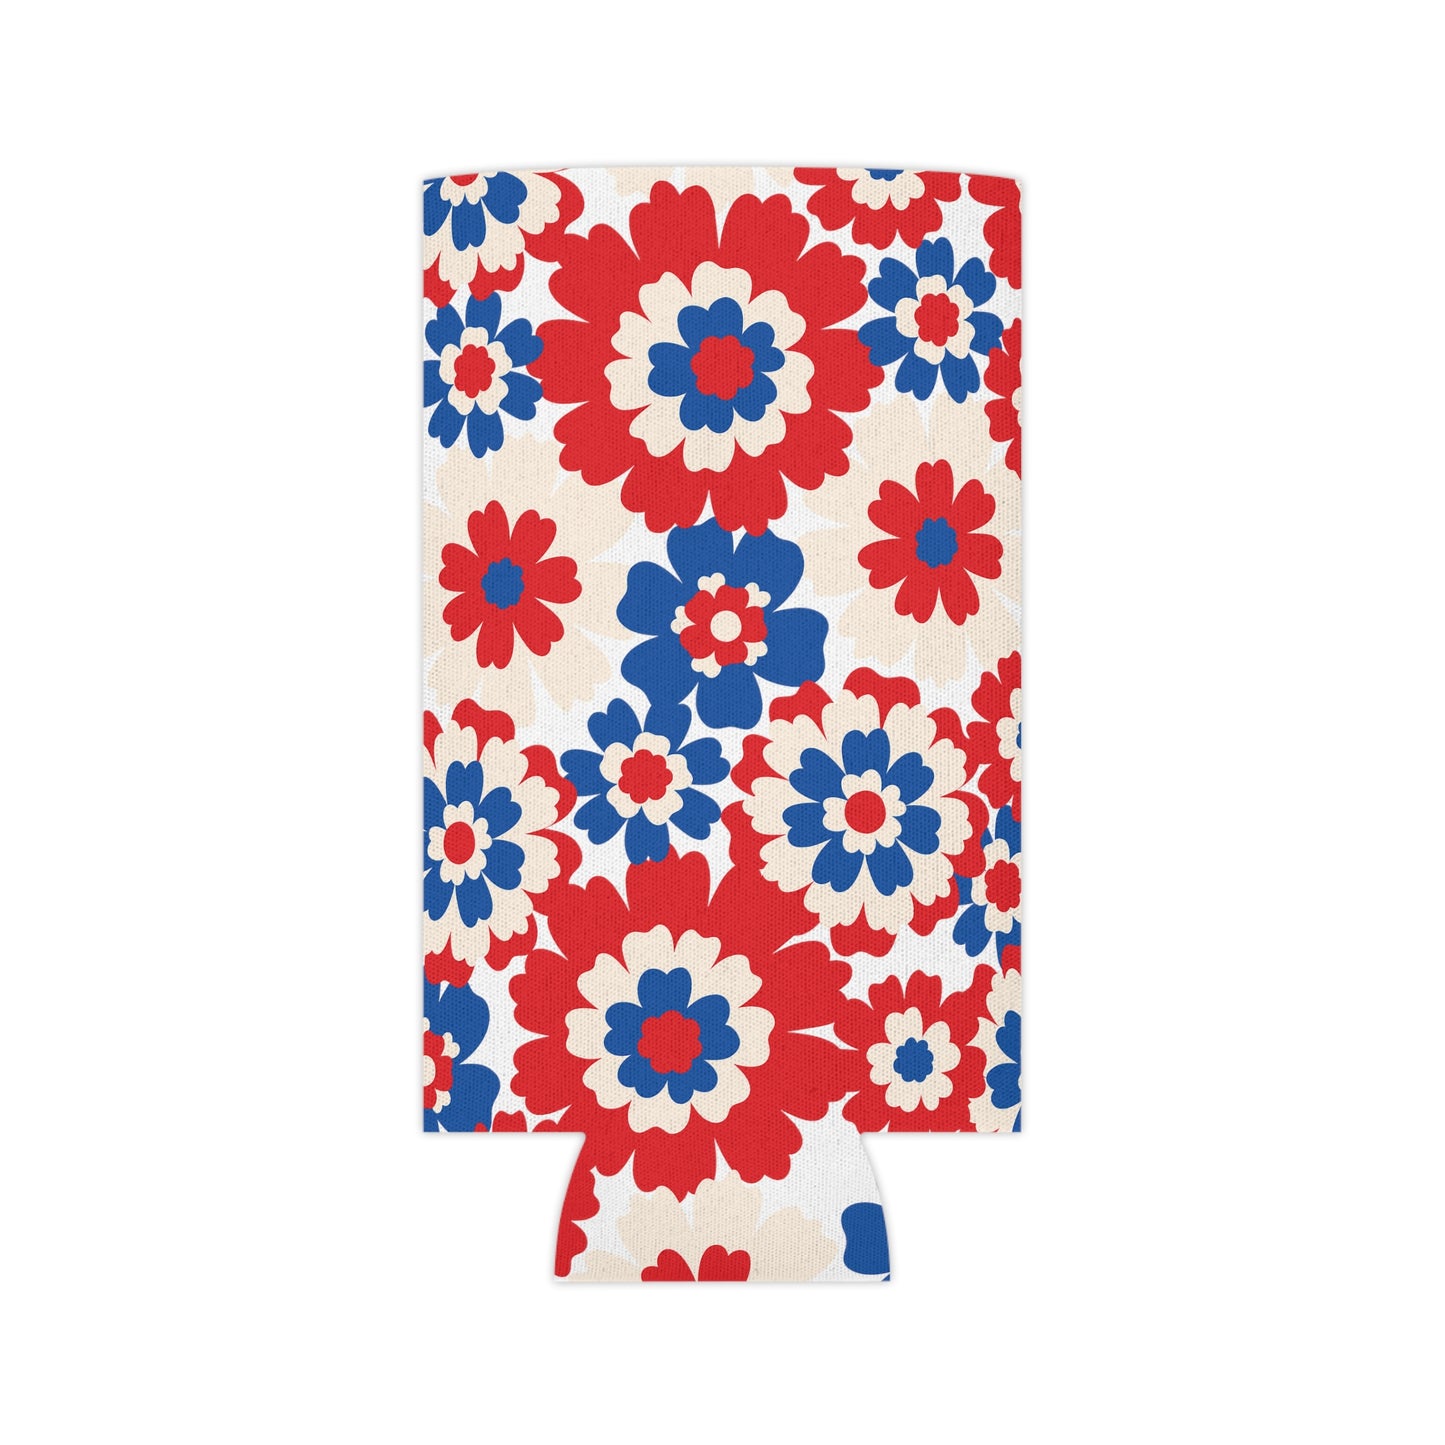 4th of July Can Koozie / Patriotic Can Cooler